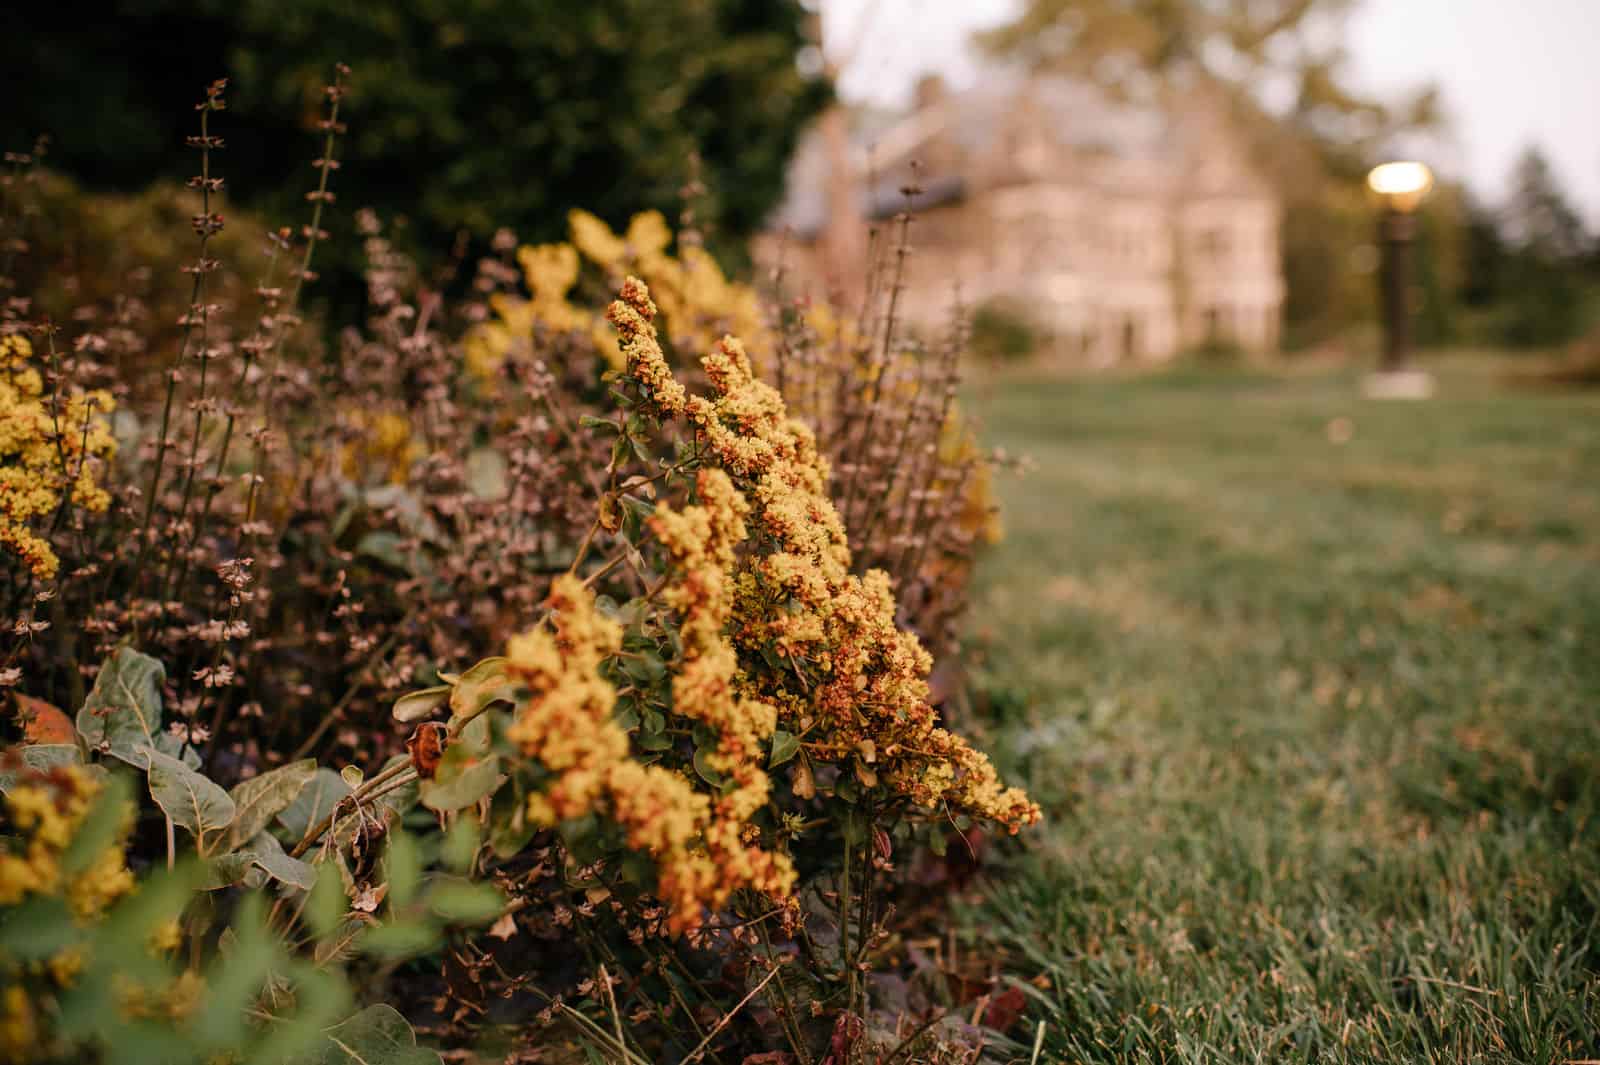 Yellow flowering shrubs in focus and foreground, the hint of a grand house faded in the background.